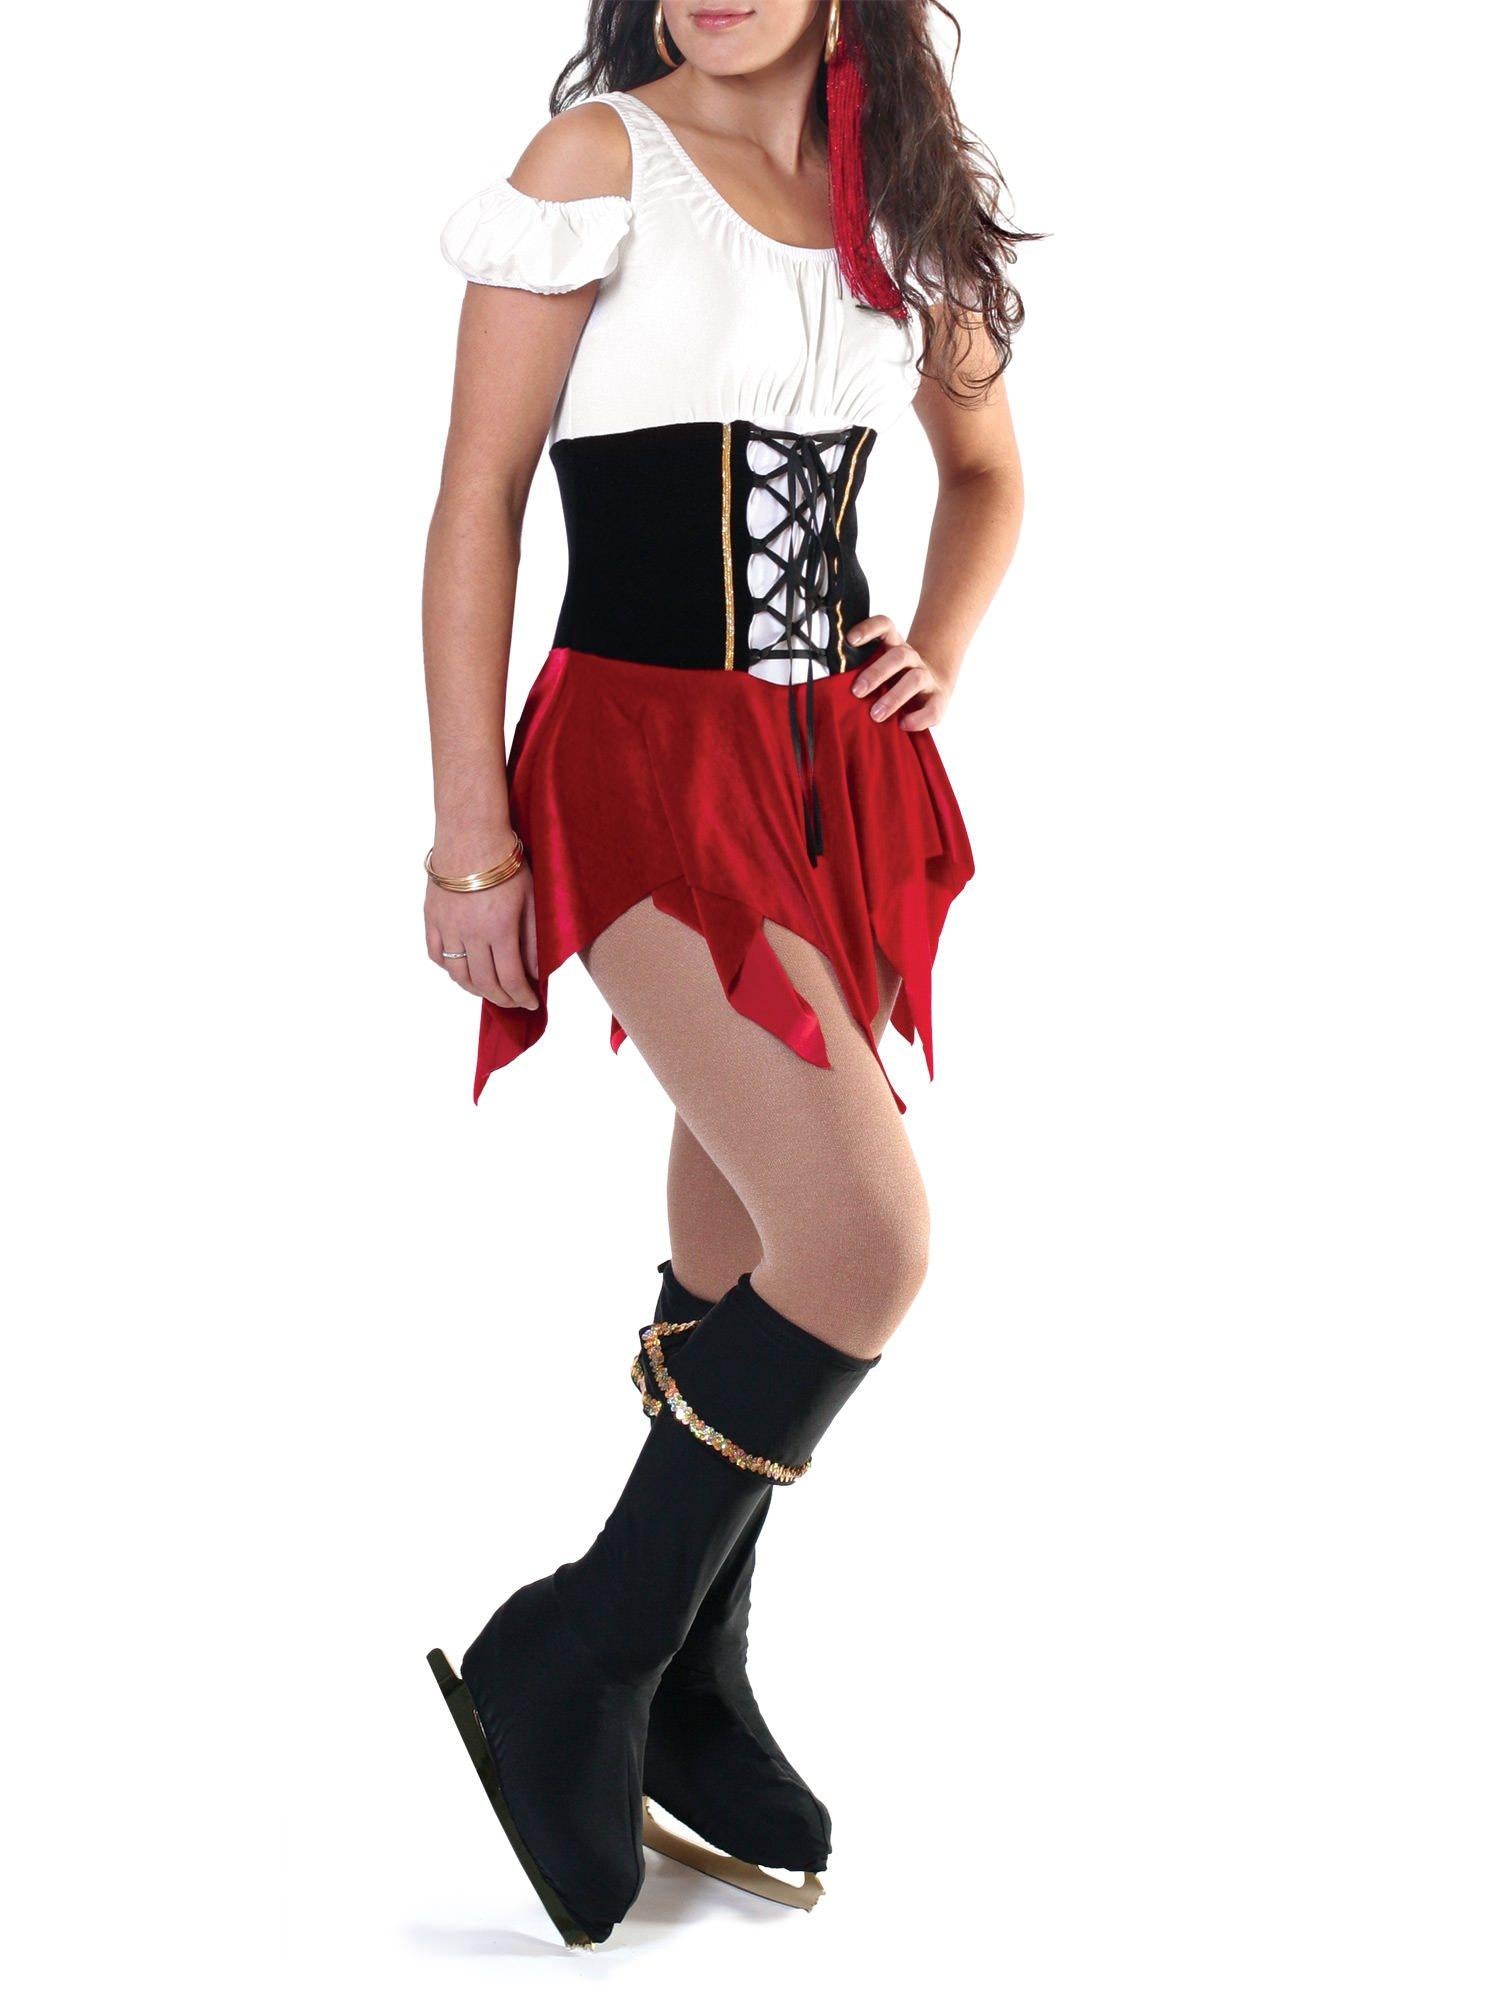 Jalie 2685 - Pirate Skating Dress and Boot Covers